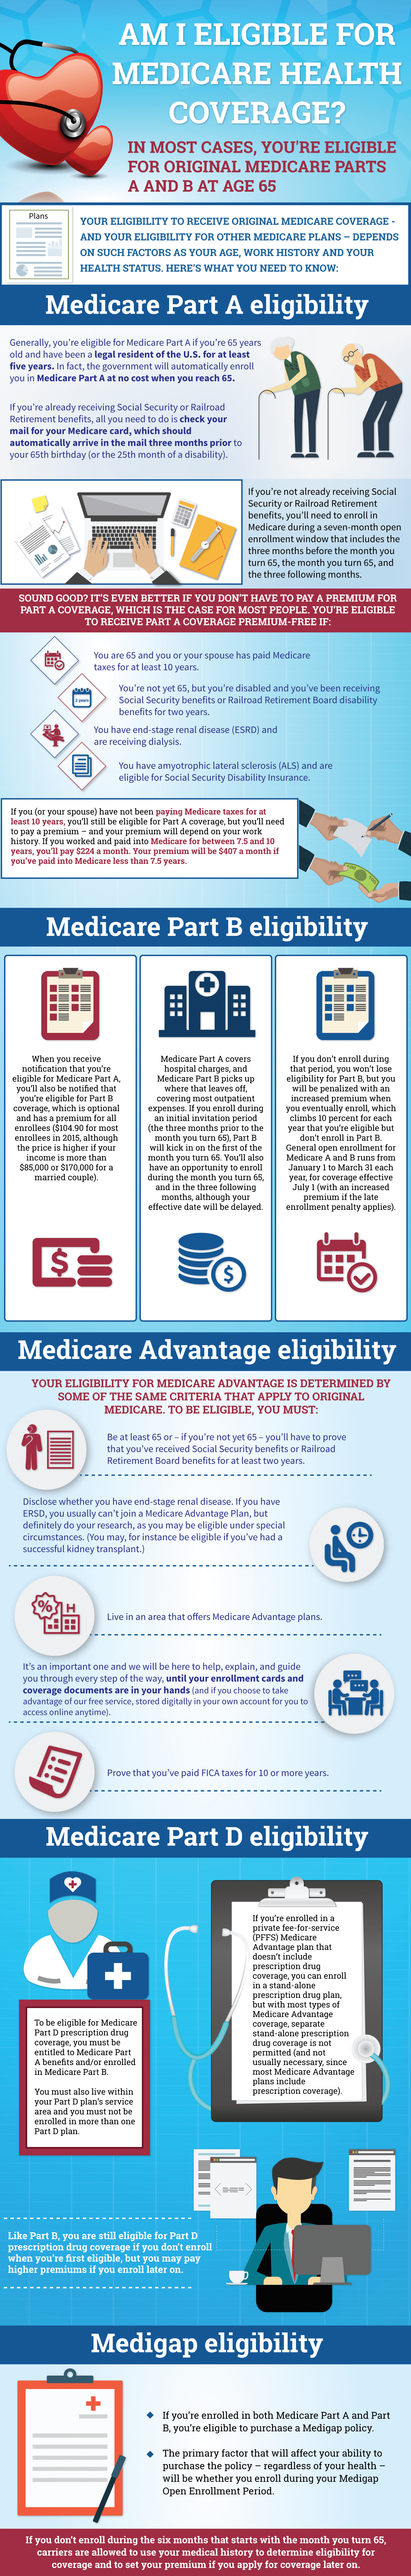 Am I eligible for Medicare health coverage